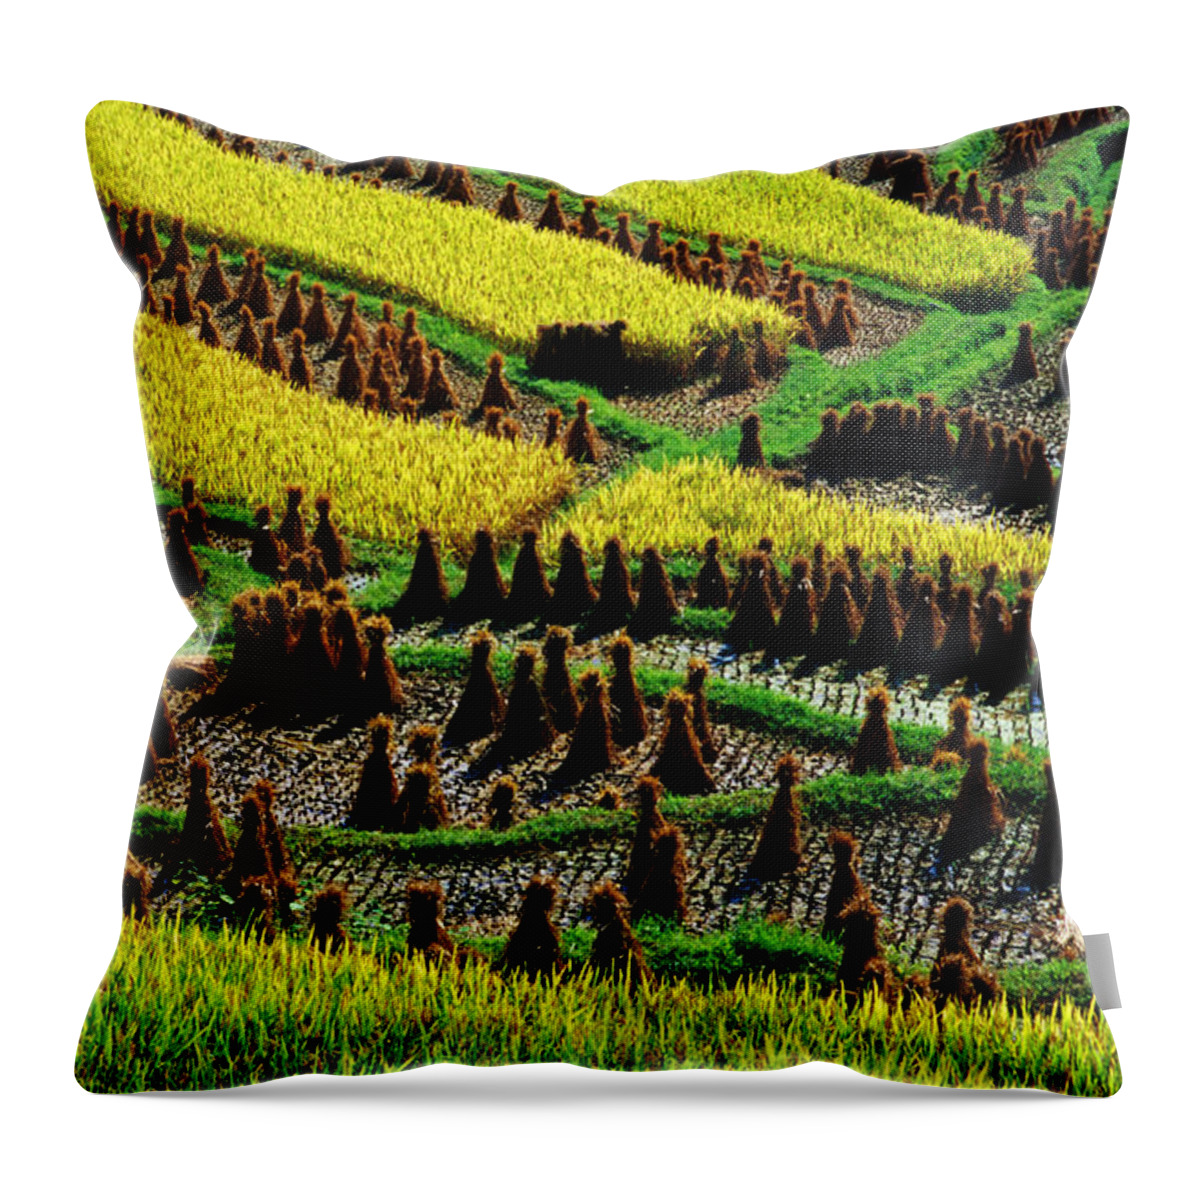 Rice Paddy Throw Pillow featuring the photograph Ricescapes, China, North-east Asia #1 by Richard I'anson